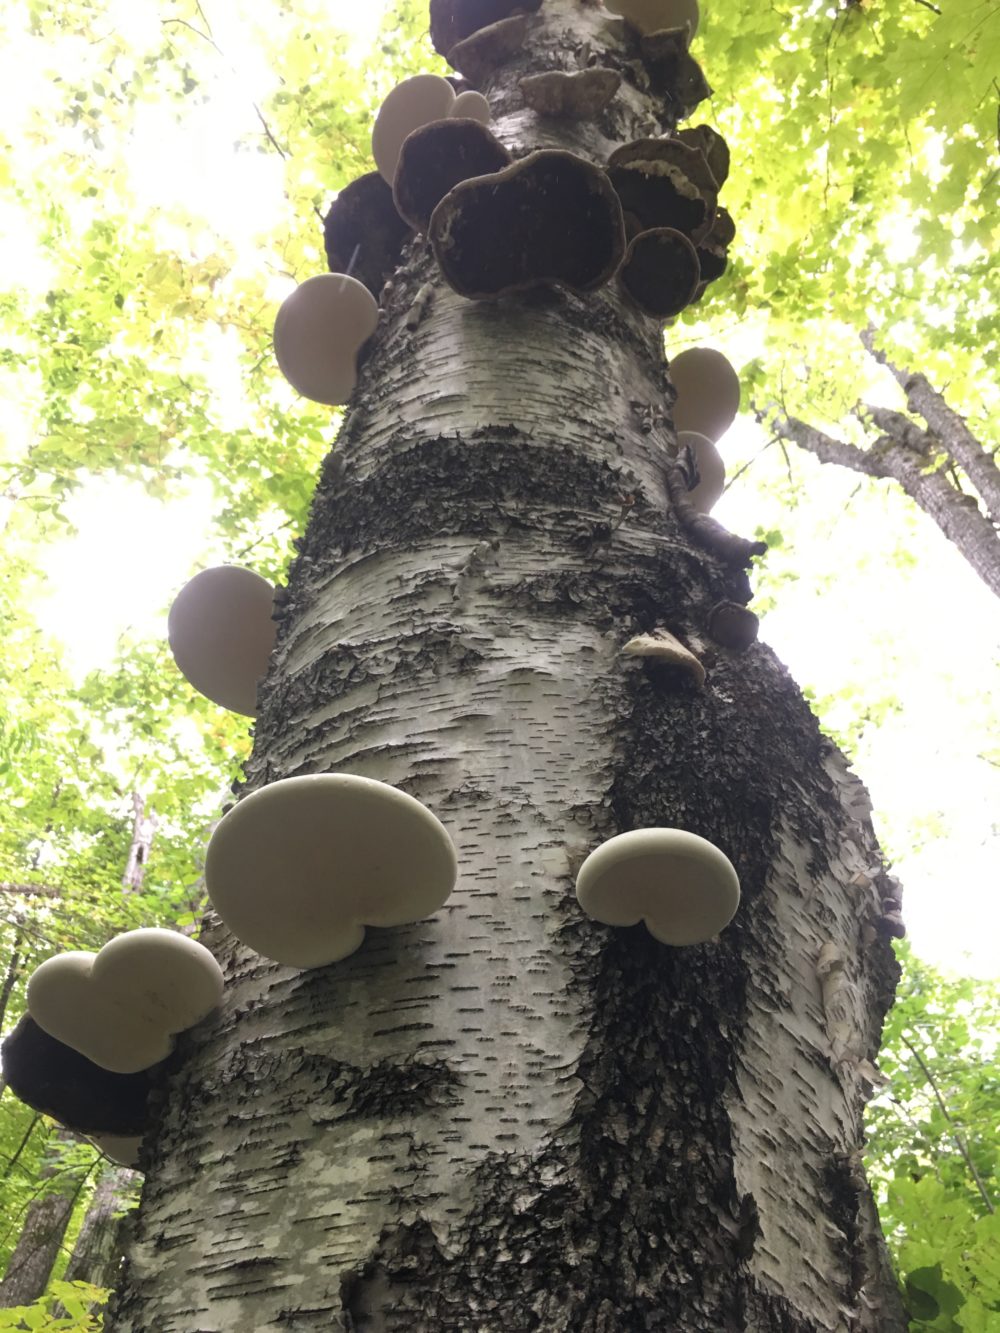 The Birch Polypore mushroom ( Fomitopsis betulina) is one of my favourite medicinals for a number of reasons. Firstly, it's common in this area as we have many damaged and dead birch trees, which are the poypore's only habitat.